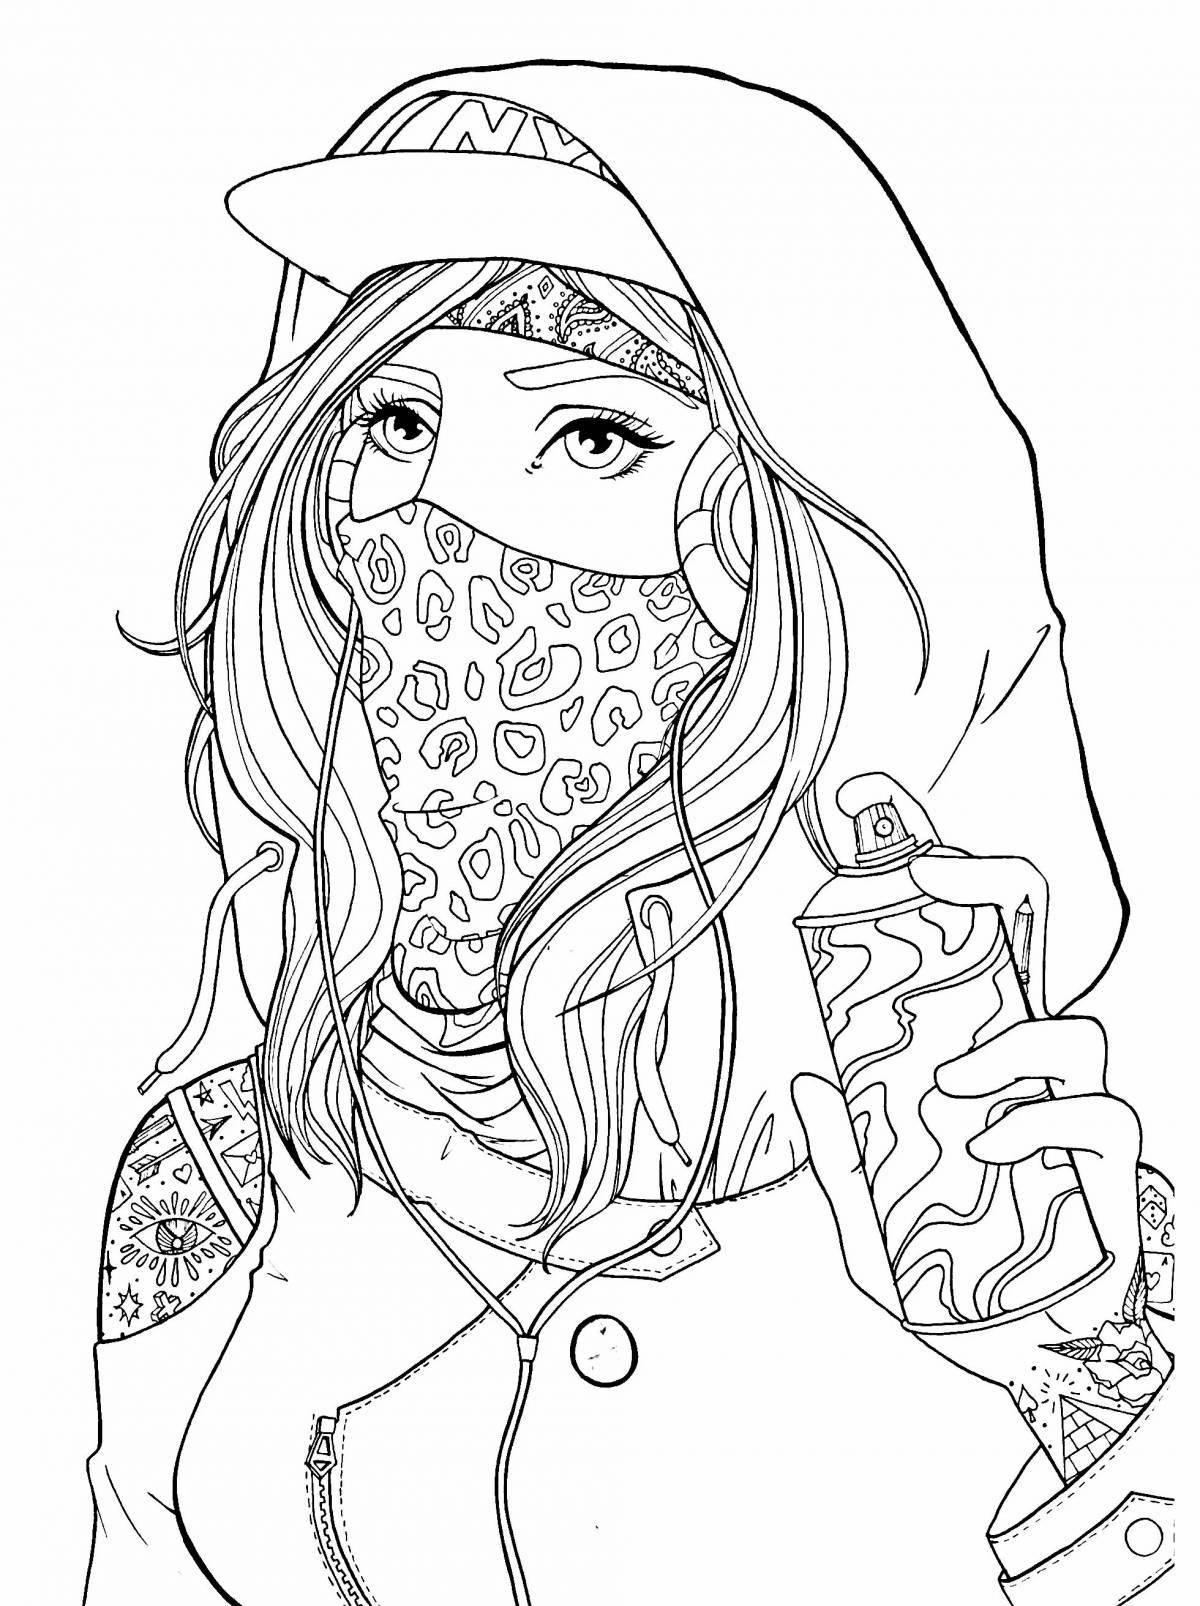 Bright coloring page 18 for girls